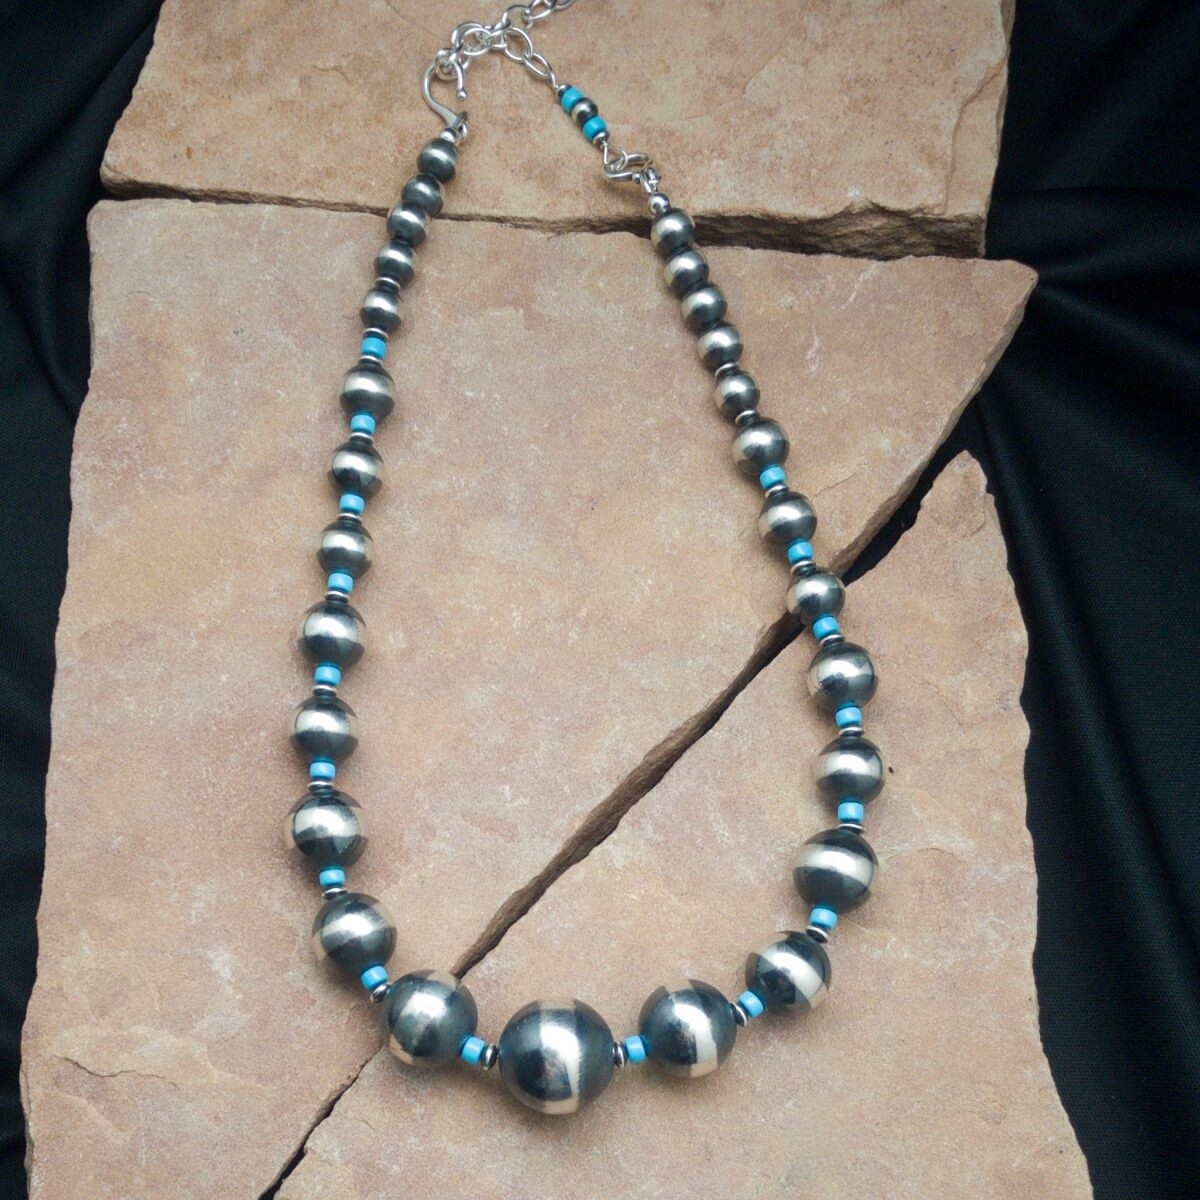 Navajo Pearls with turquoise beads